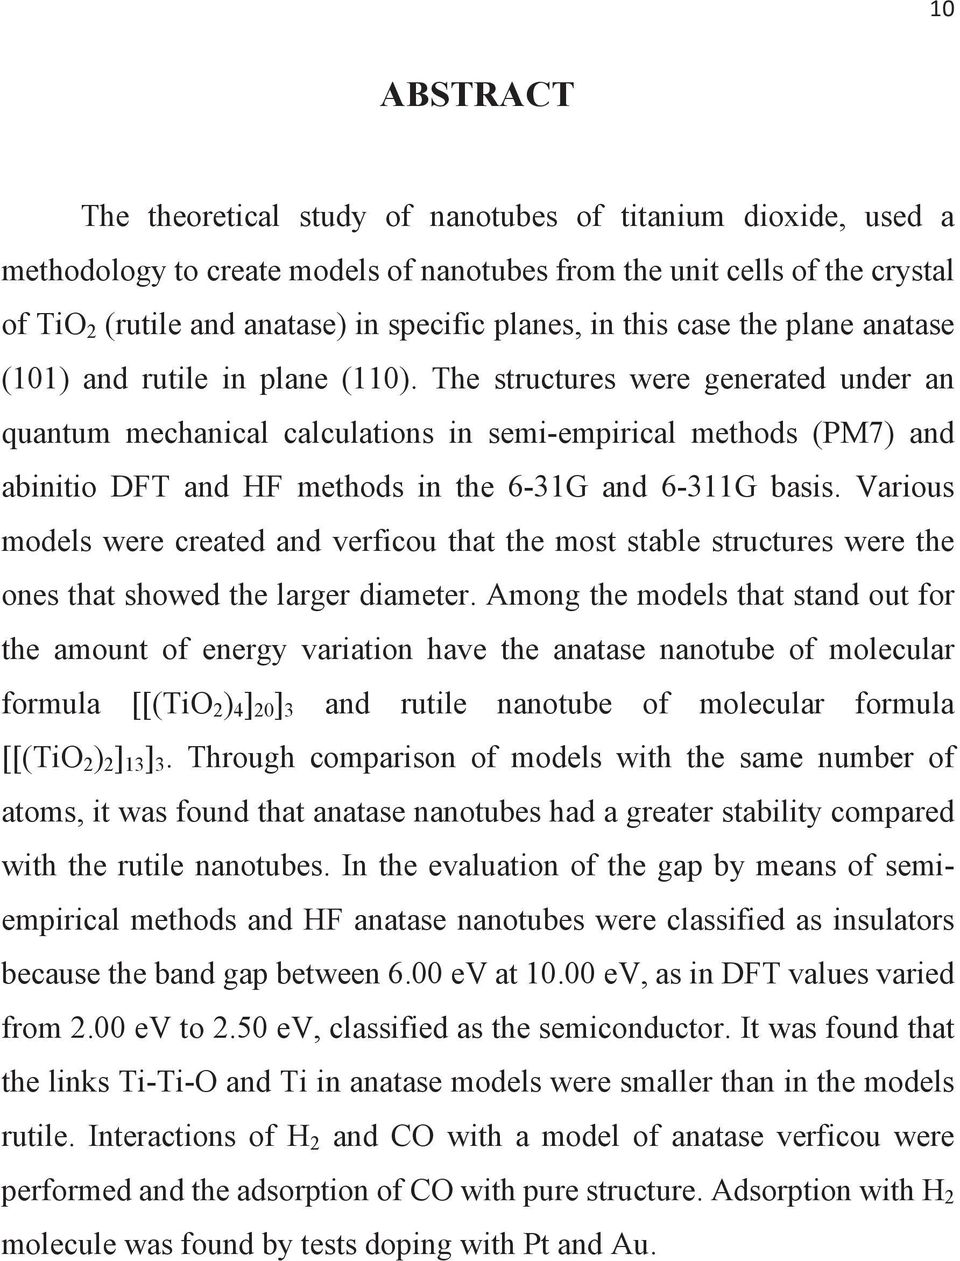 The structures were generated under an quantum mechanical calculations in semi-empirical methods (PM7) and abinitio DFT and HF methods in the 6-31G and 6-311G basis.